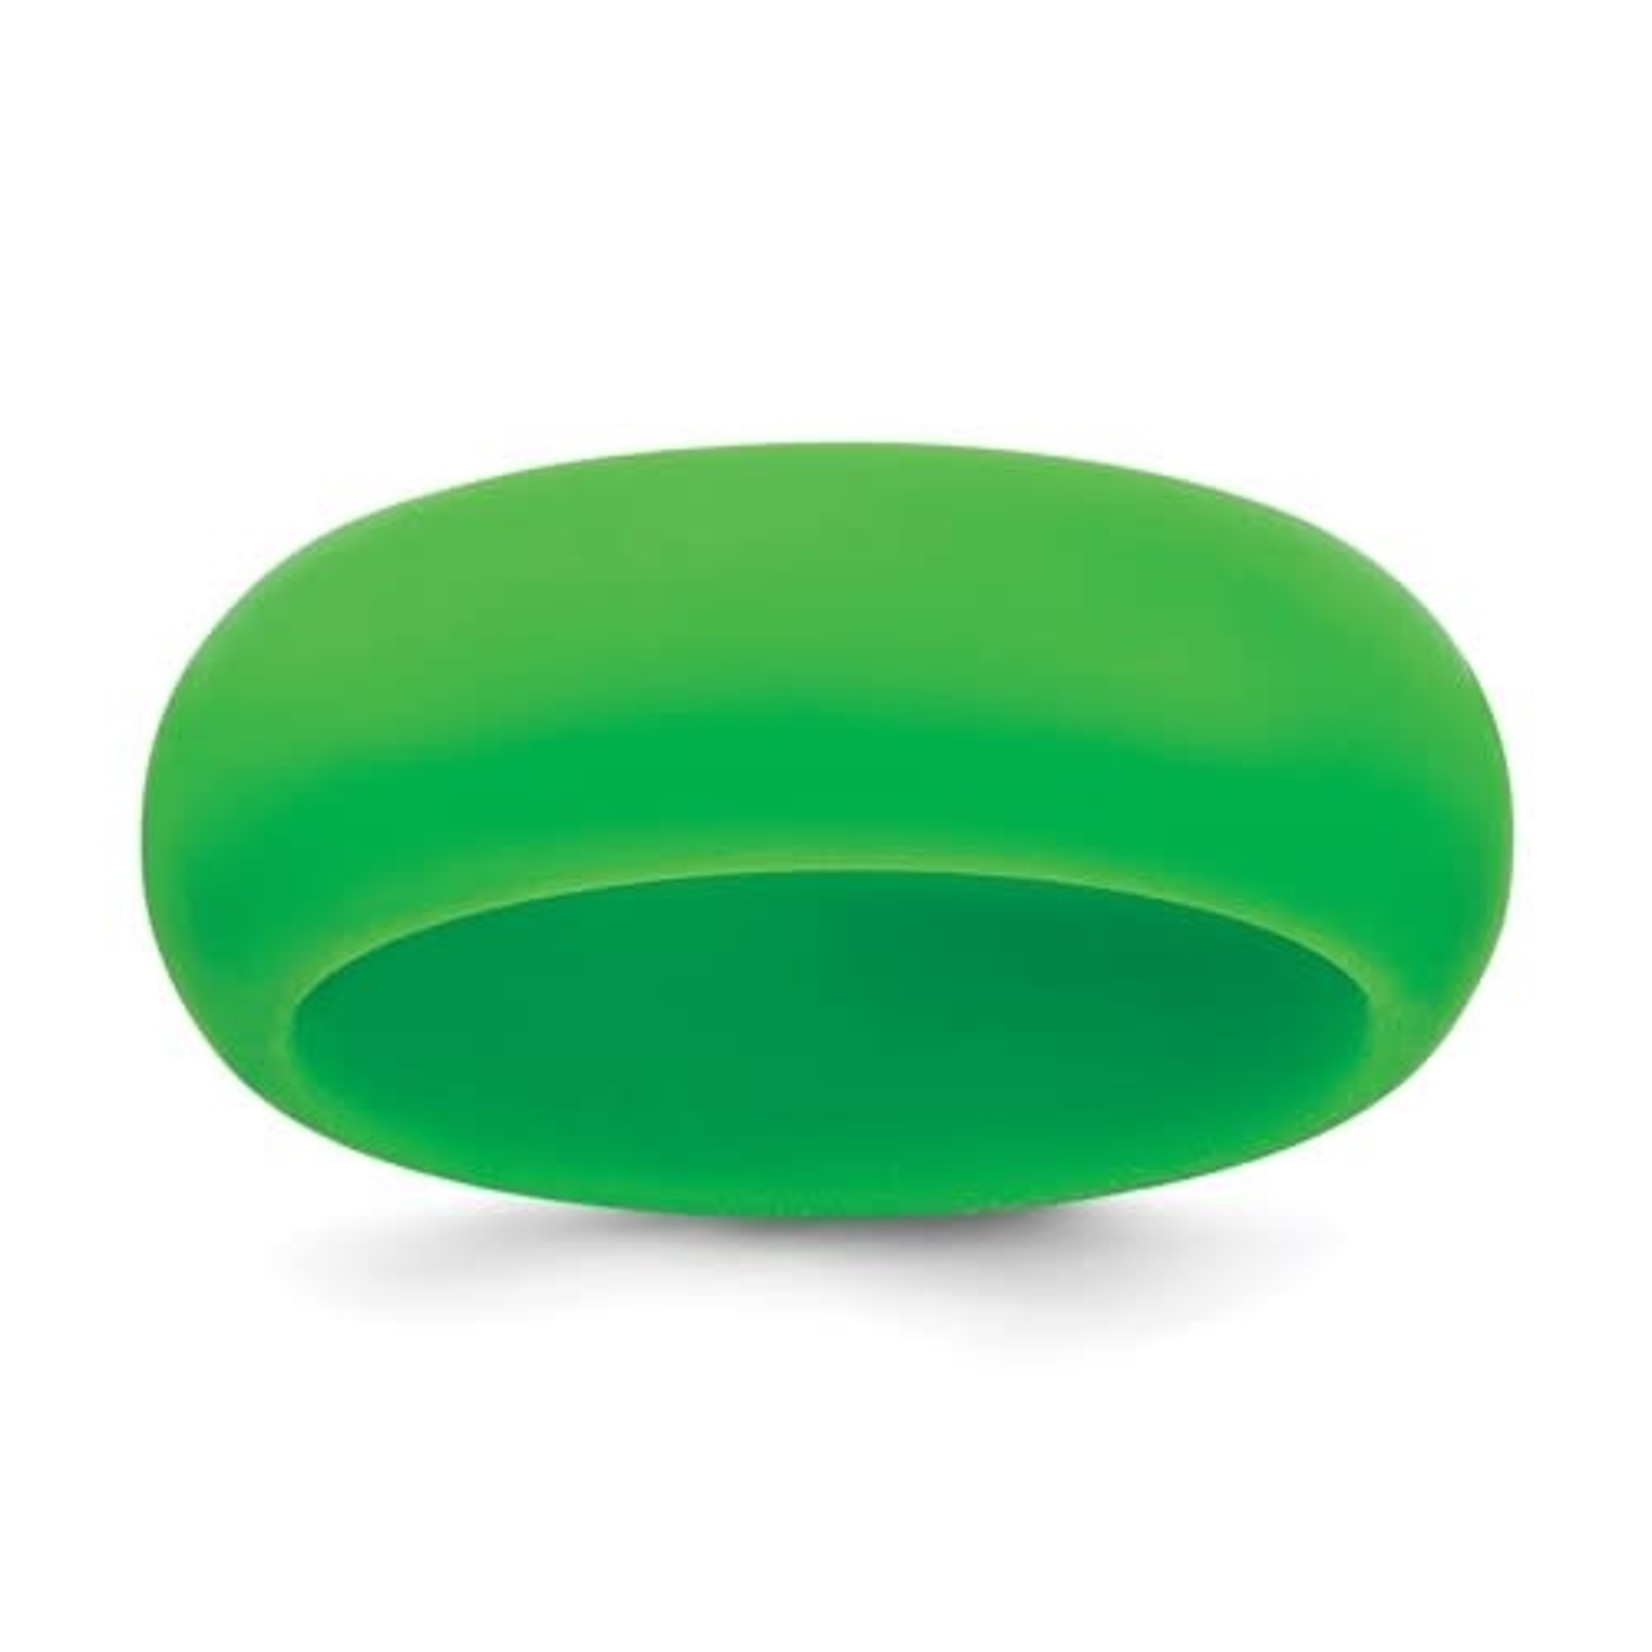 QUALITY GOLD OF CINCINNATI INC Silicone Green 8mm Domed Band size 10